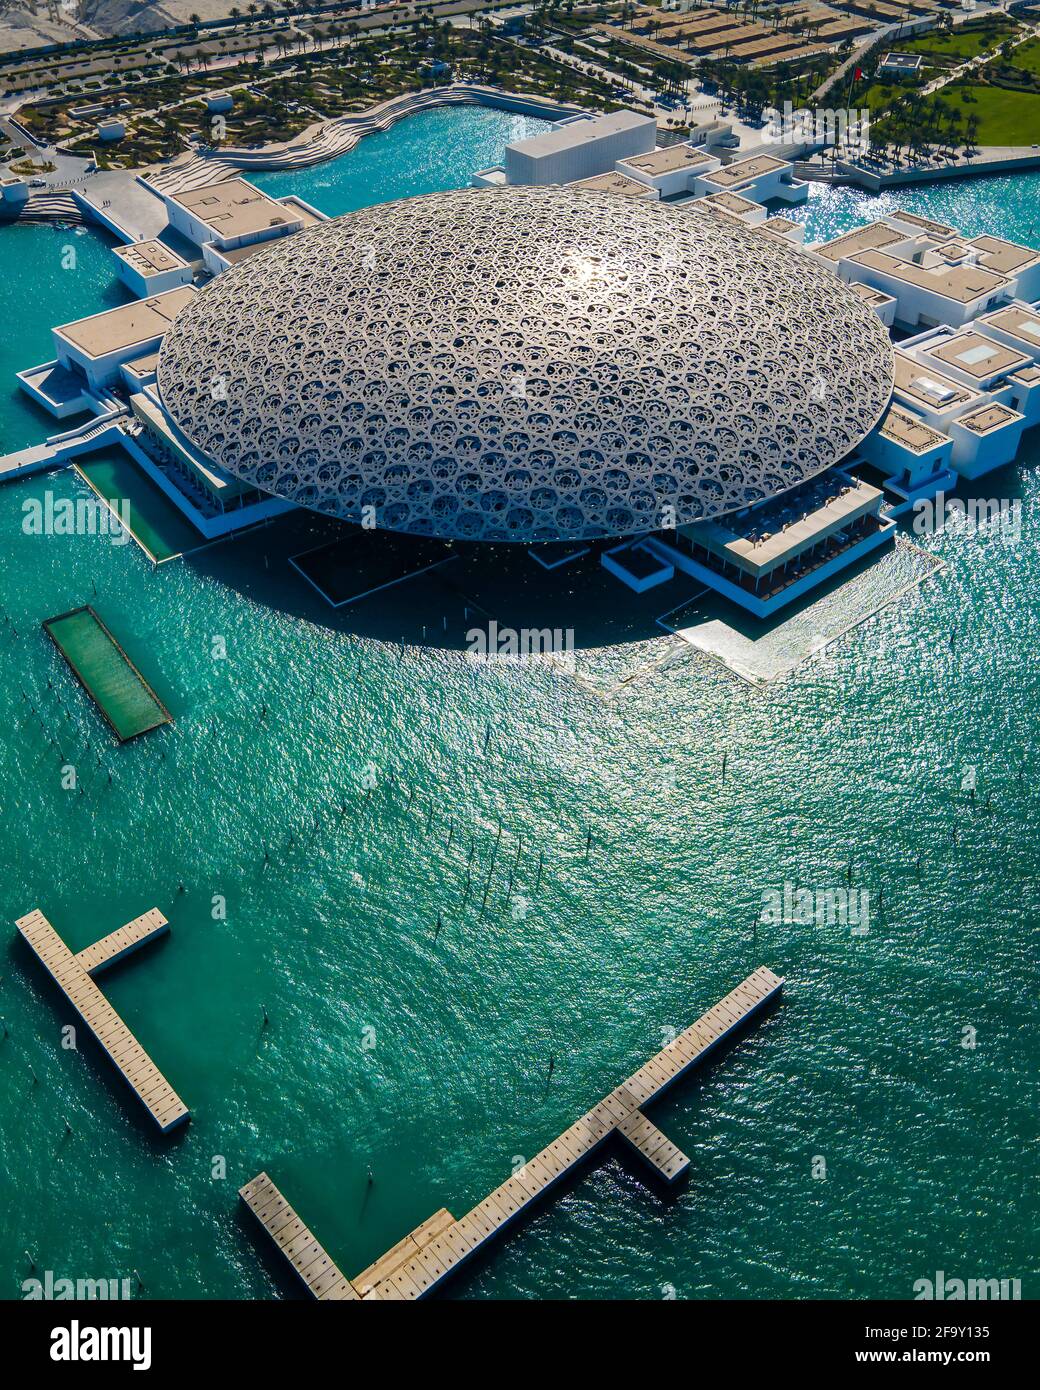 Abu Dhabi, United Arab Emirates - April 6, 2021: Louvre museum in Abu Dhabi emirate of the United Arab Emirates at sunrise aerial drone view of the bu Stock Photo